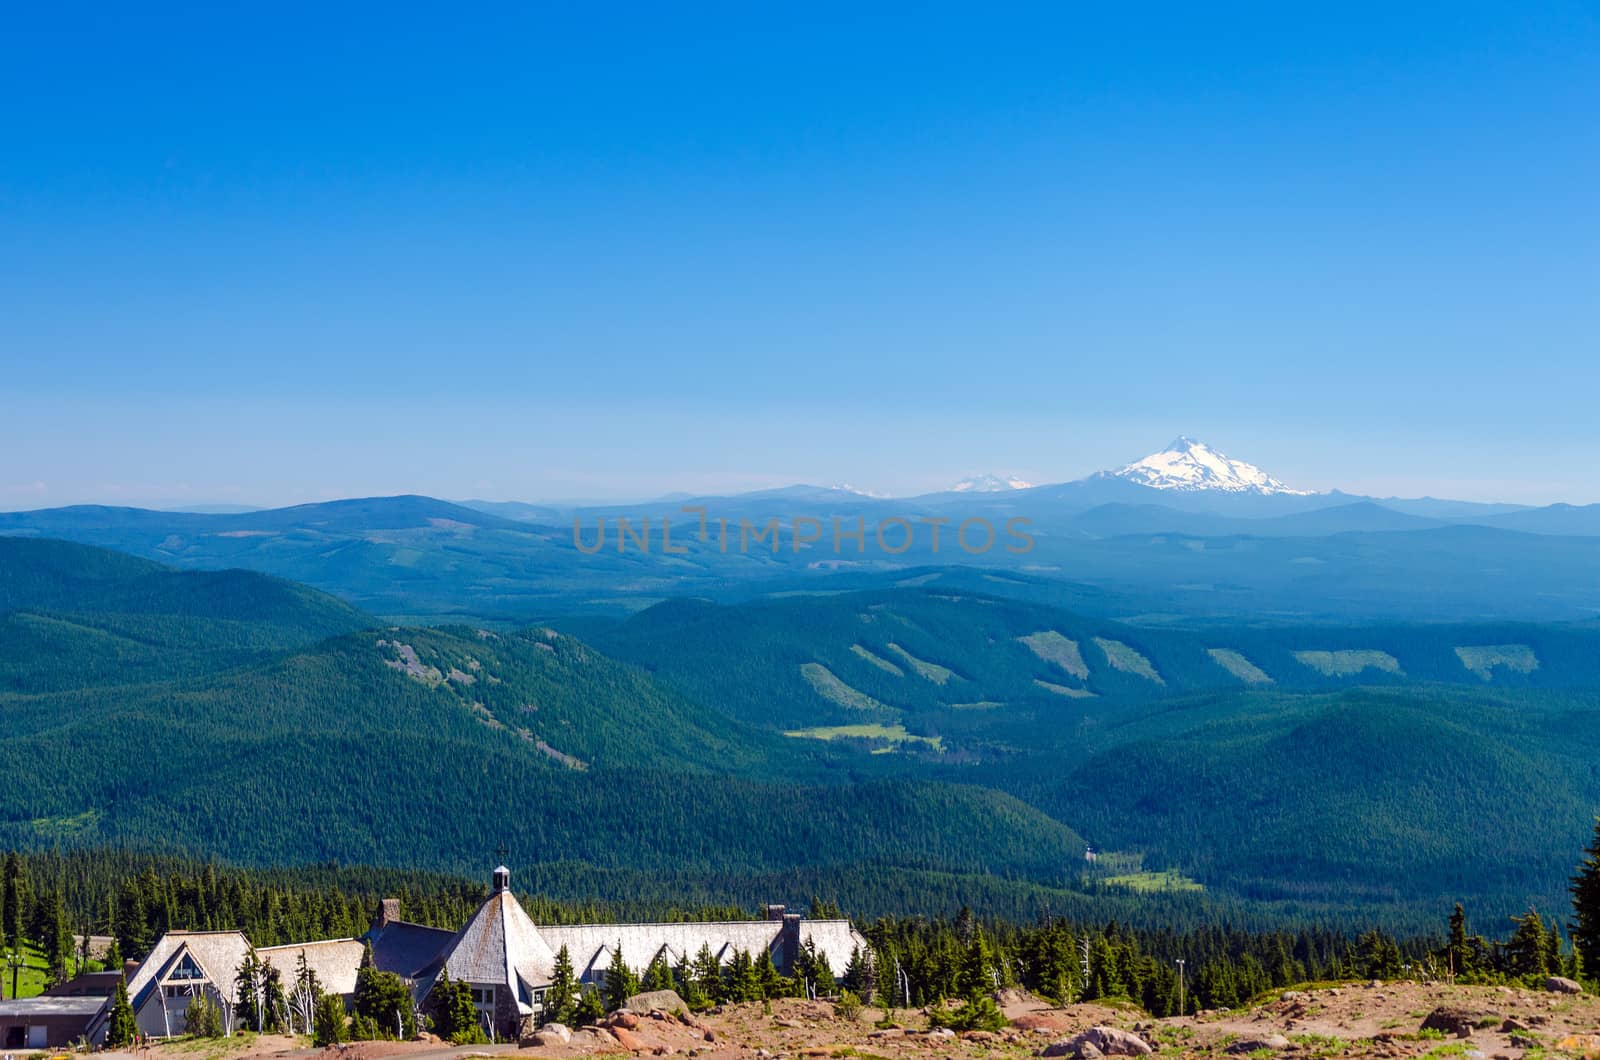 View of Mount Jefferson with Timberline Lodge and thick pine tree forests in Oregon